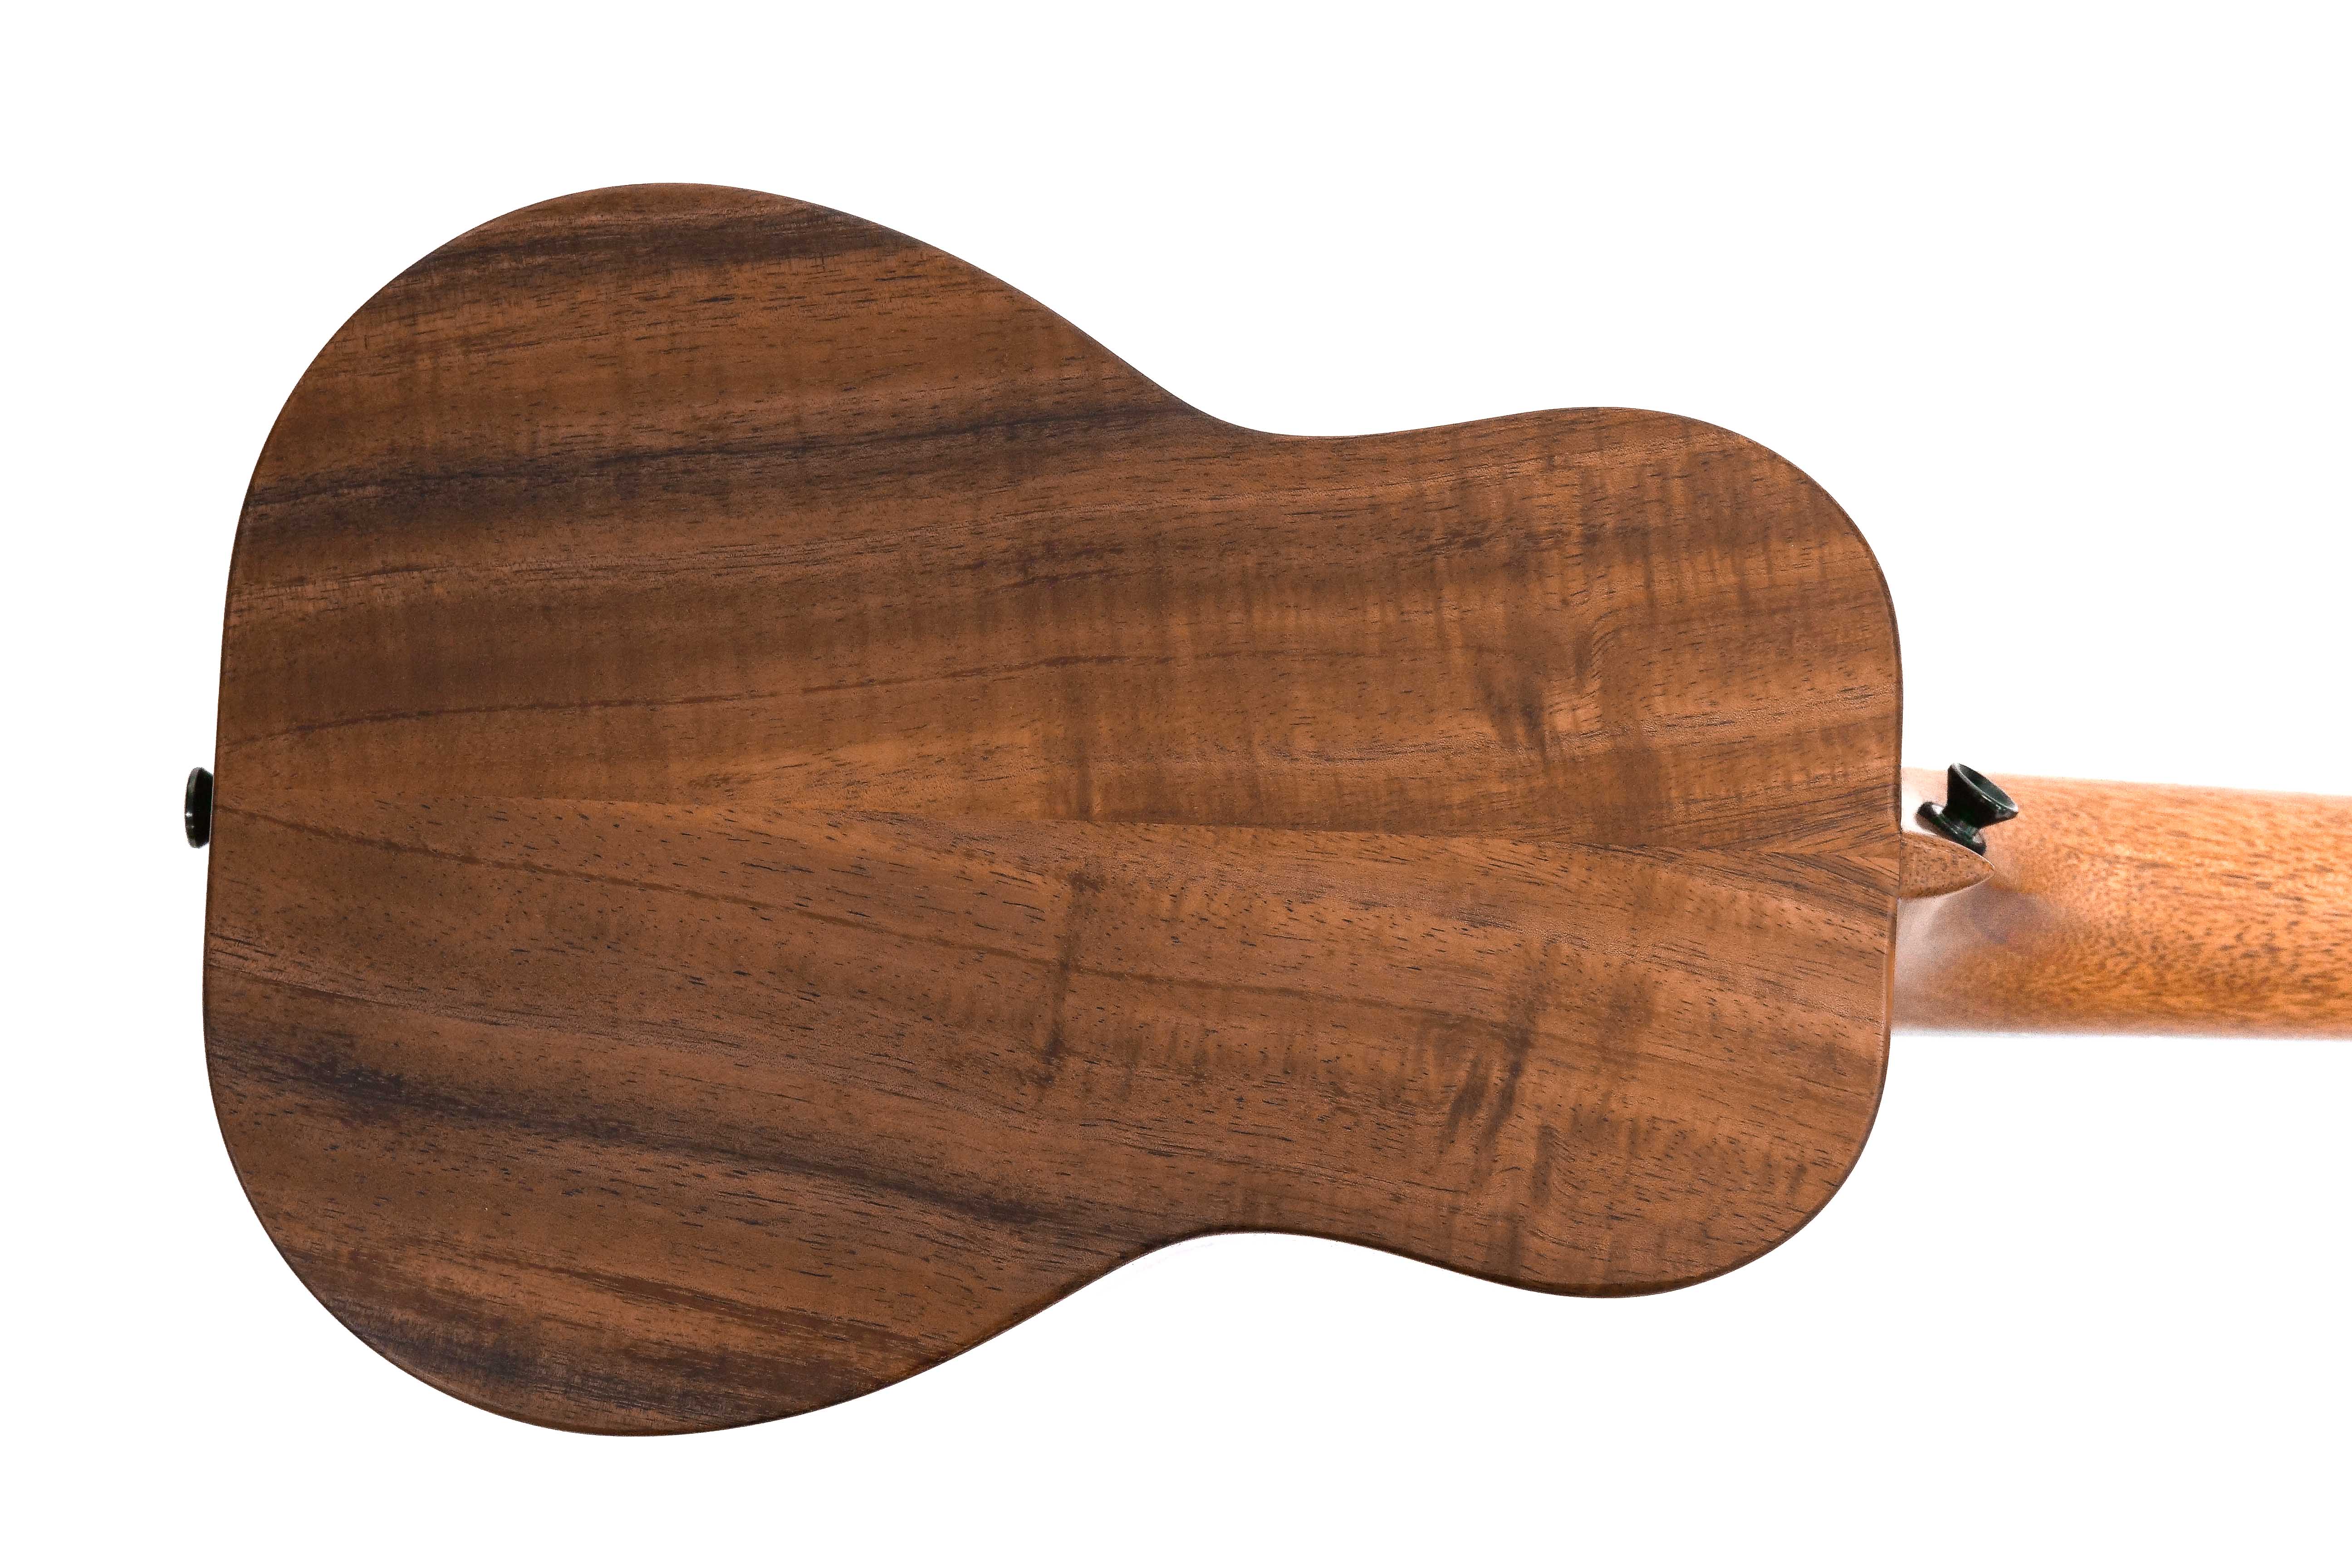 [PRE-OWNED] Kanile'a K-1 C Deluxe Concert Ukulele Solid Koa "Silk" Made In Hawaii